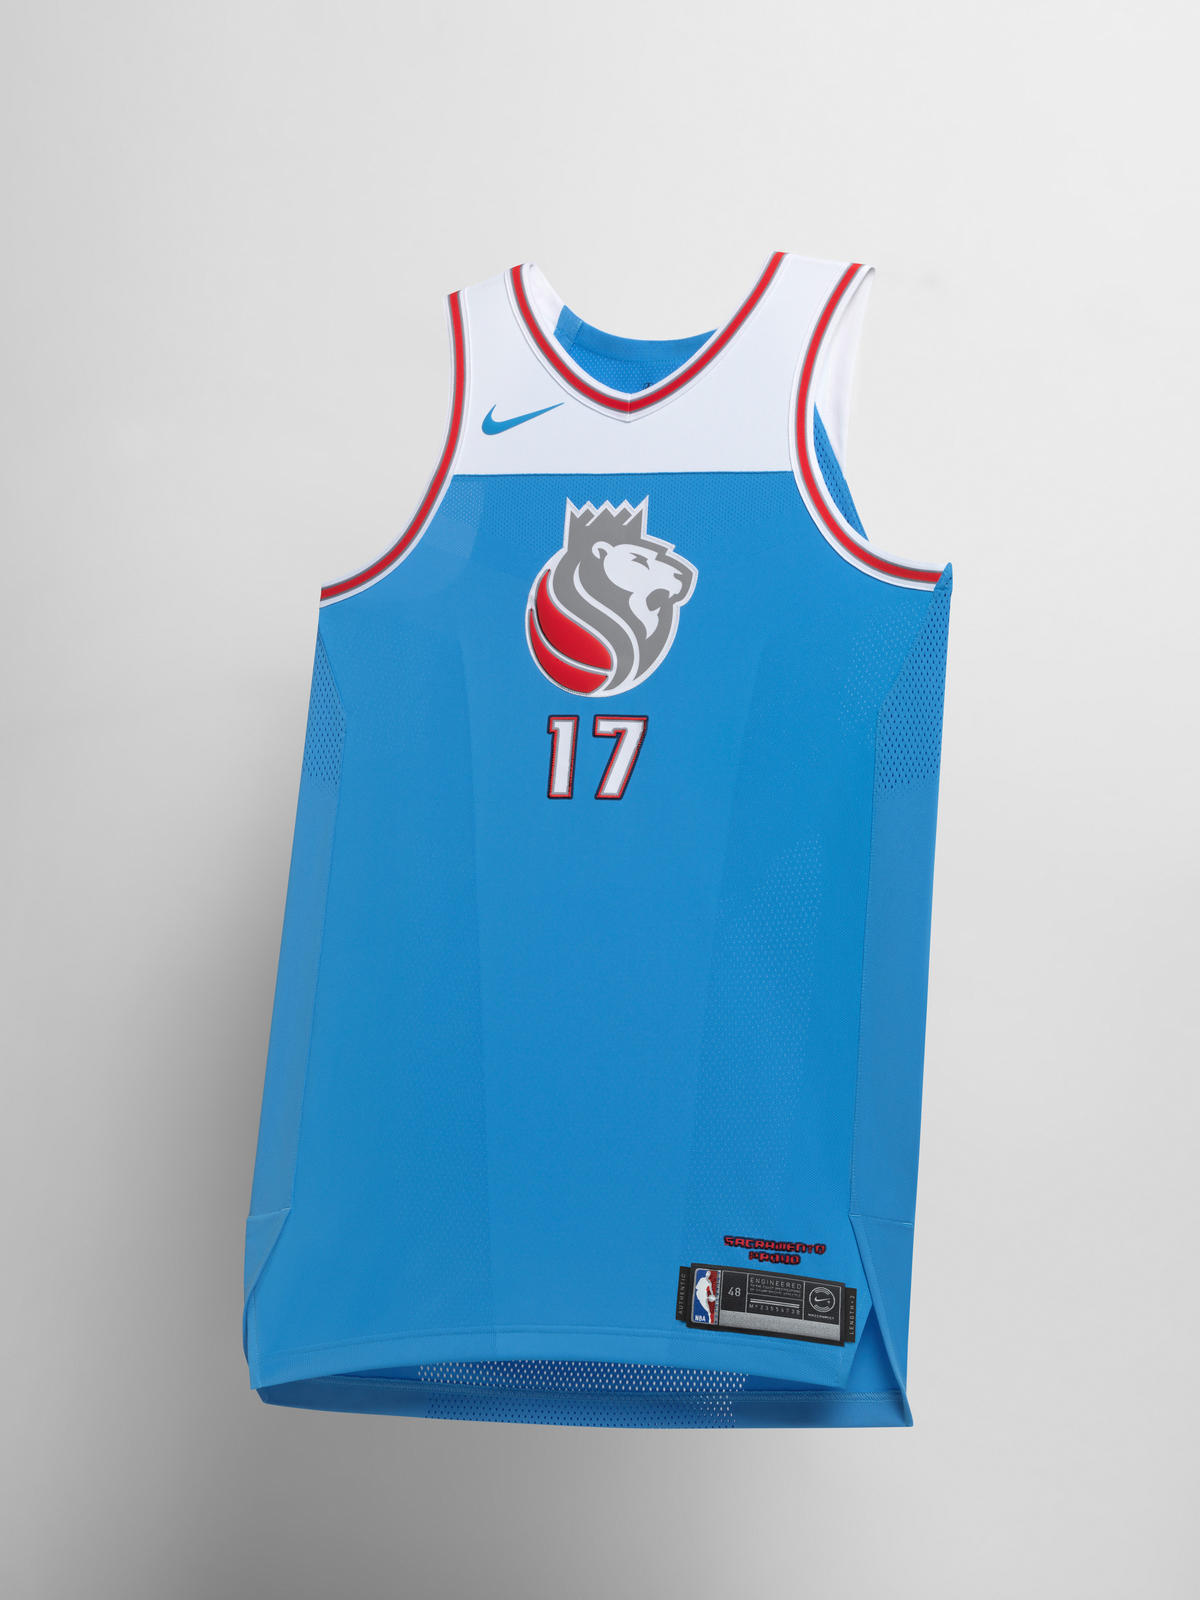 Nike Unveils New NBA City Edition Jerseys - WearTesters